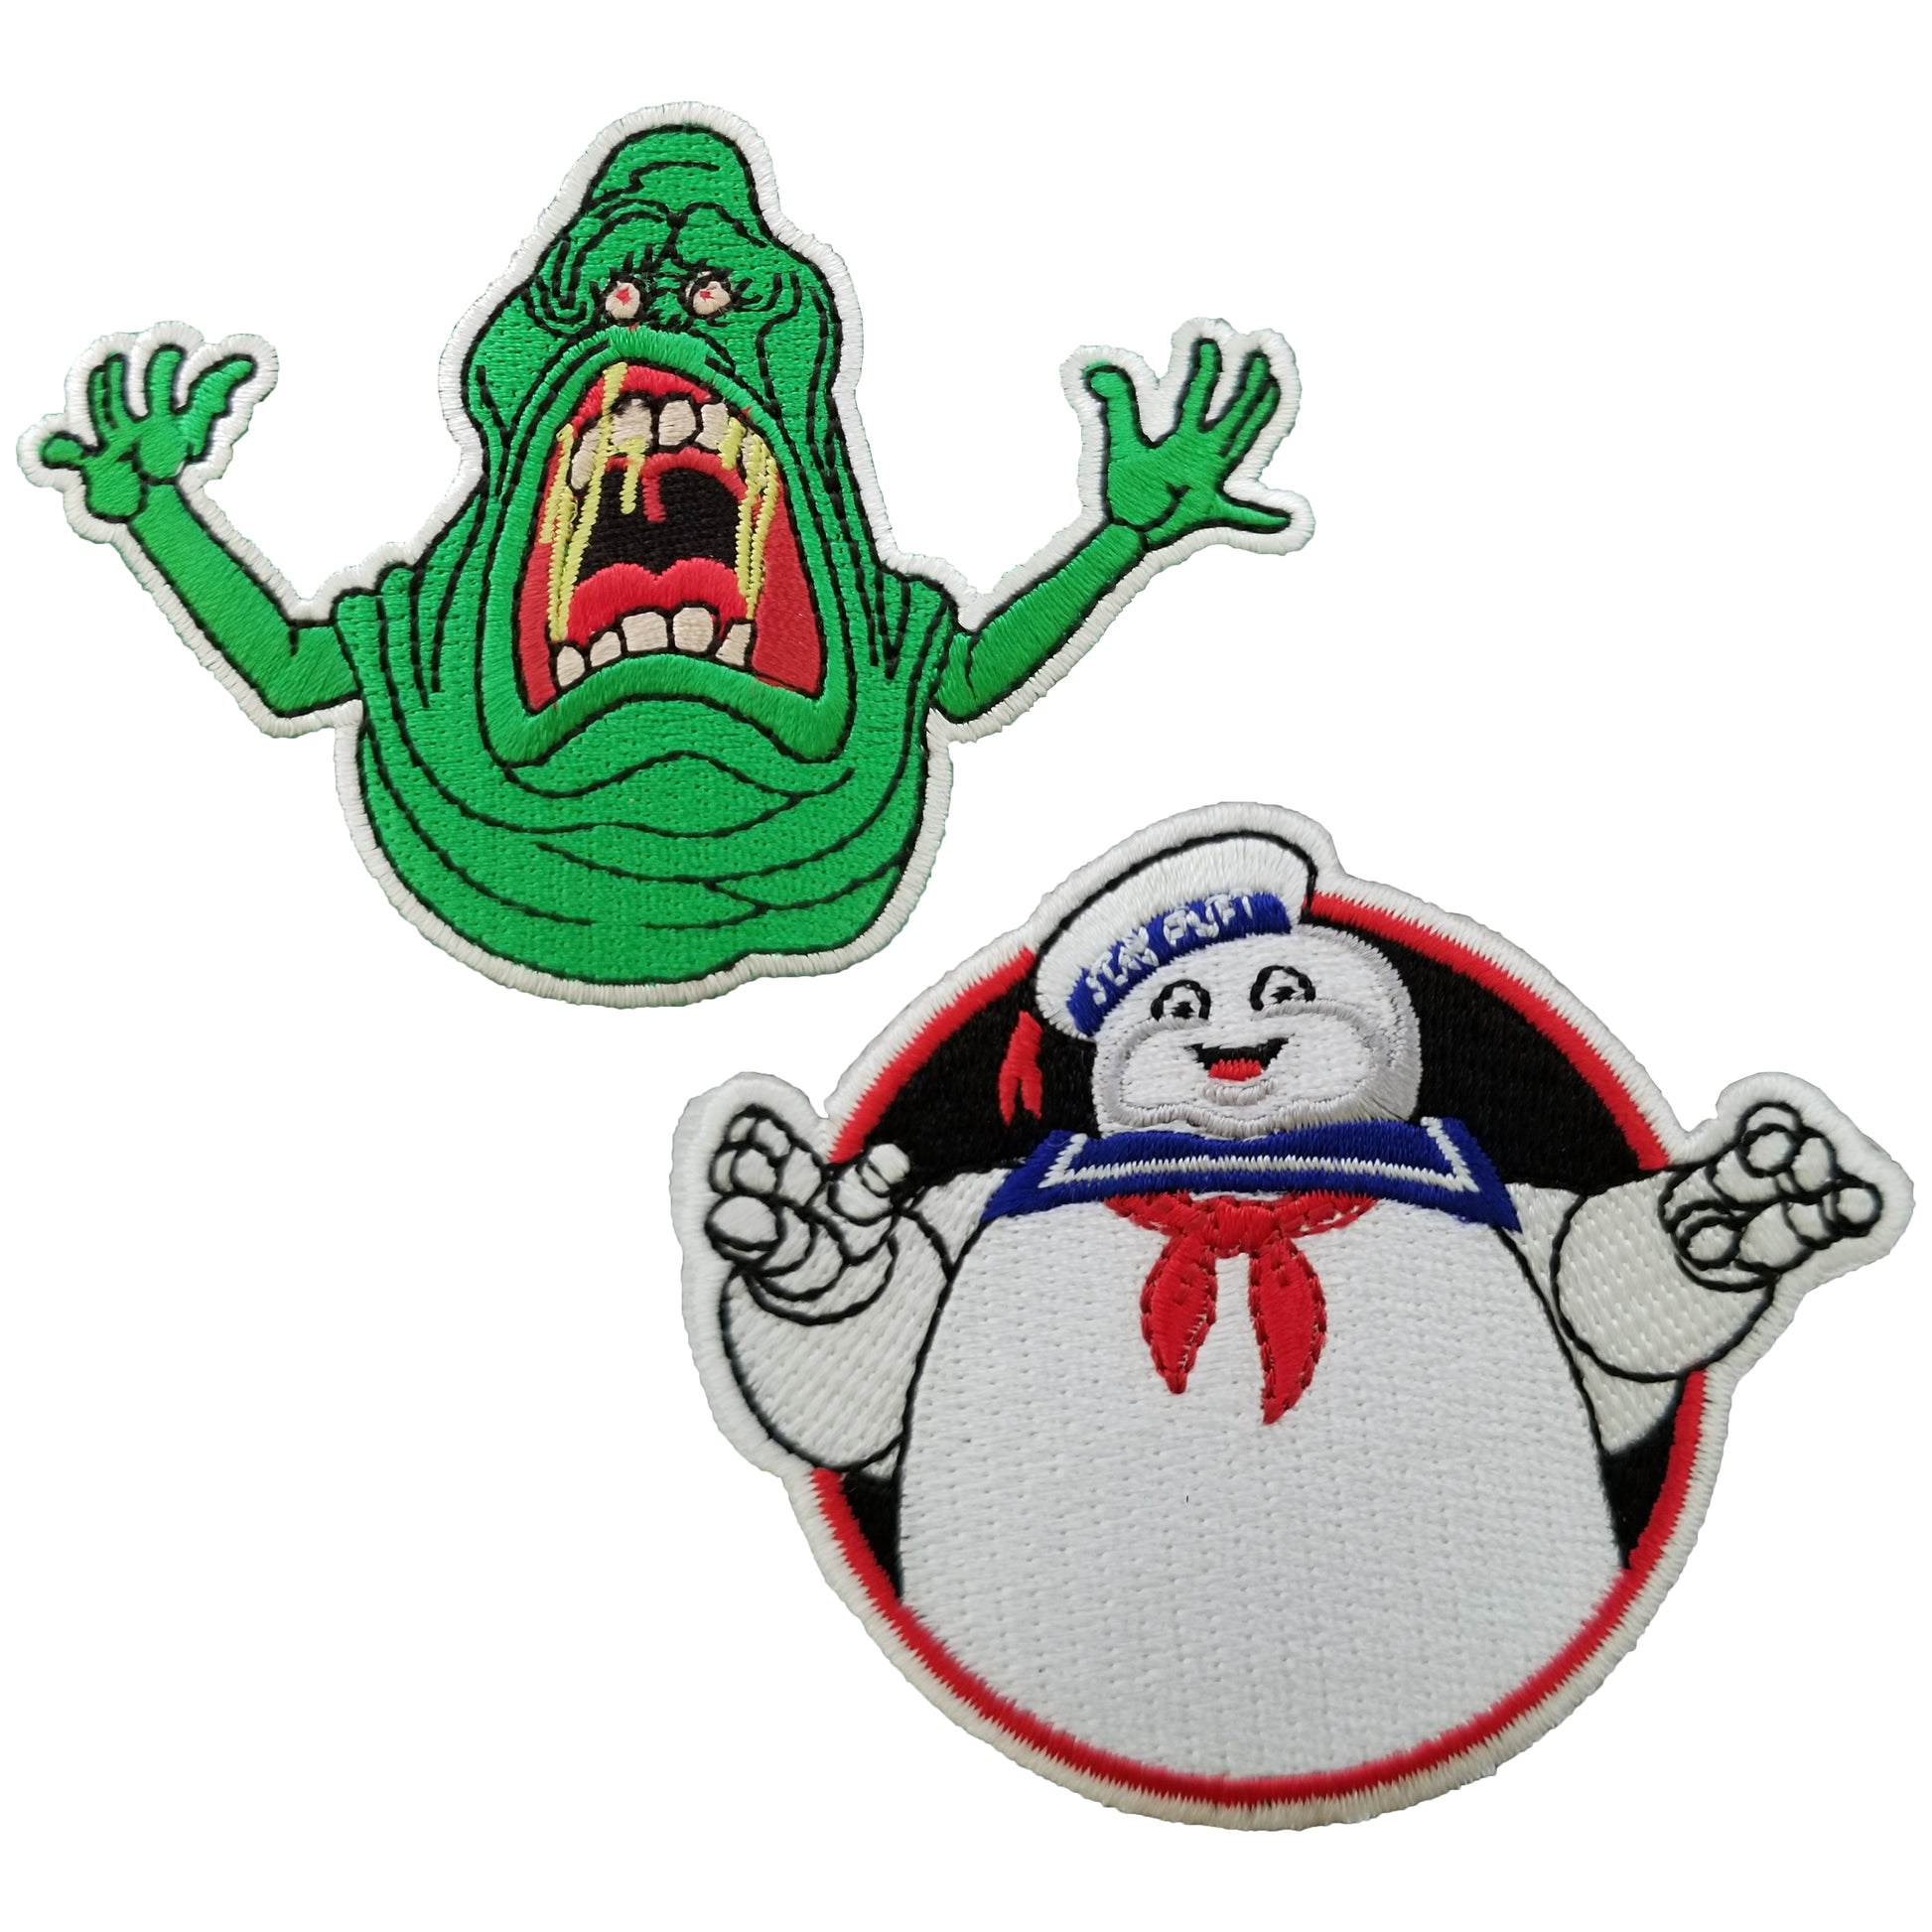 Ghostbusters Slimer and Stay Puft Marshmallow Man Patches (SDCC Exclusive) - Icon Heroes 